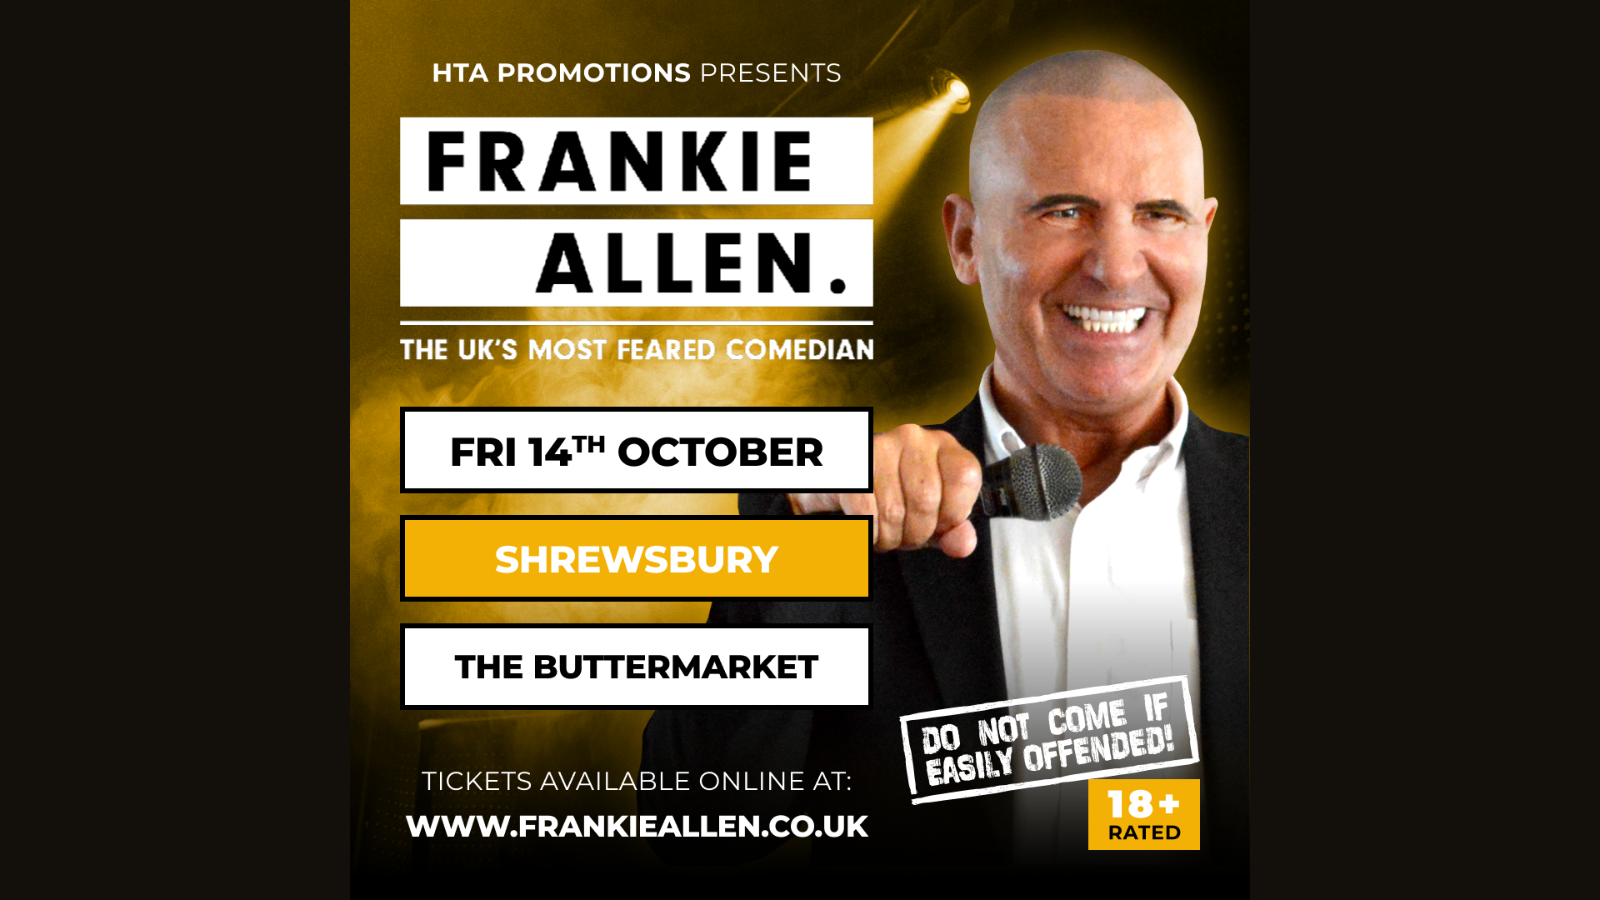 Frankie Allen – The UK’s most feared comedian is BACK BY POPULAR DEMAND! (LIVE)